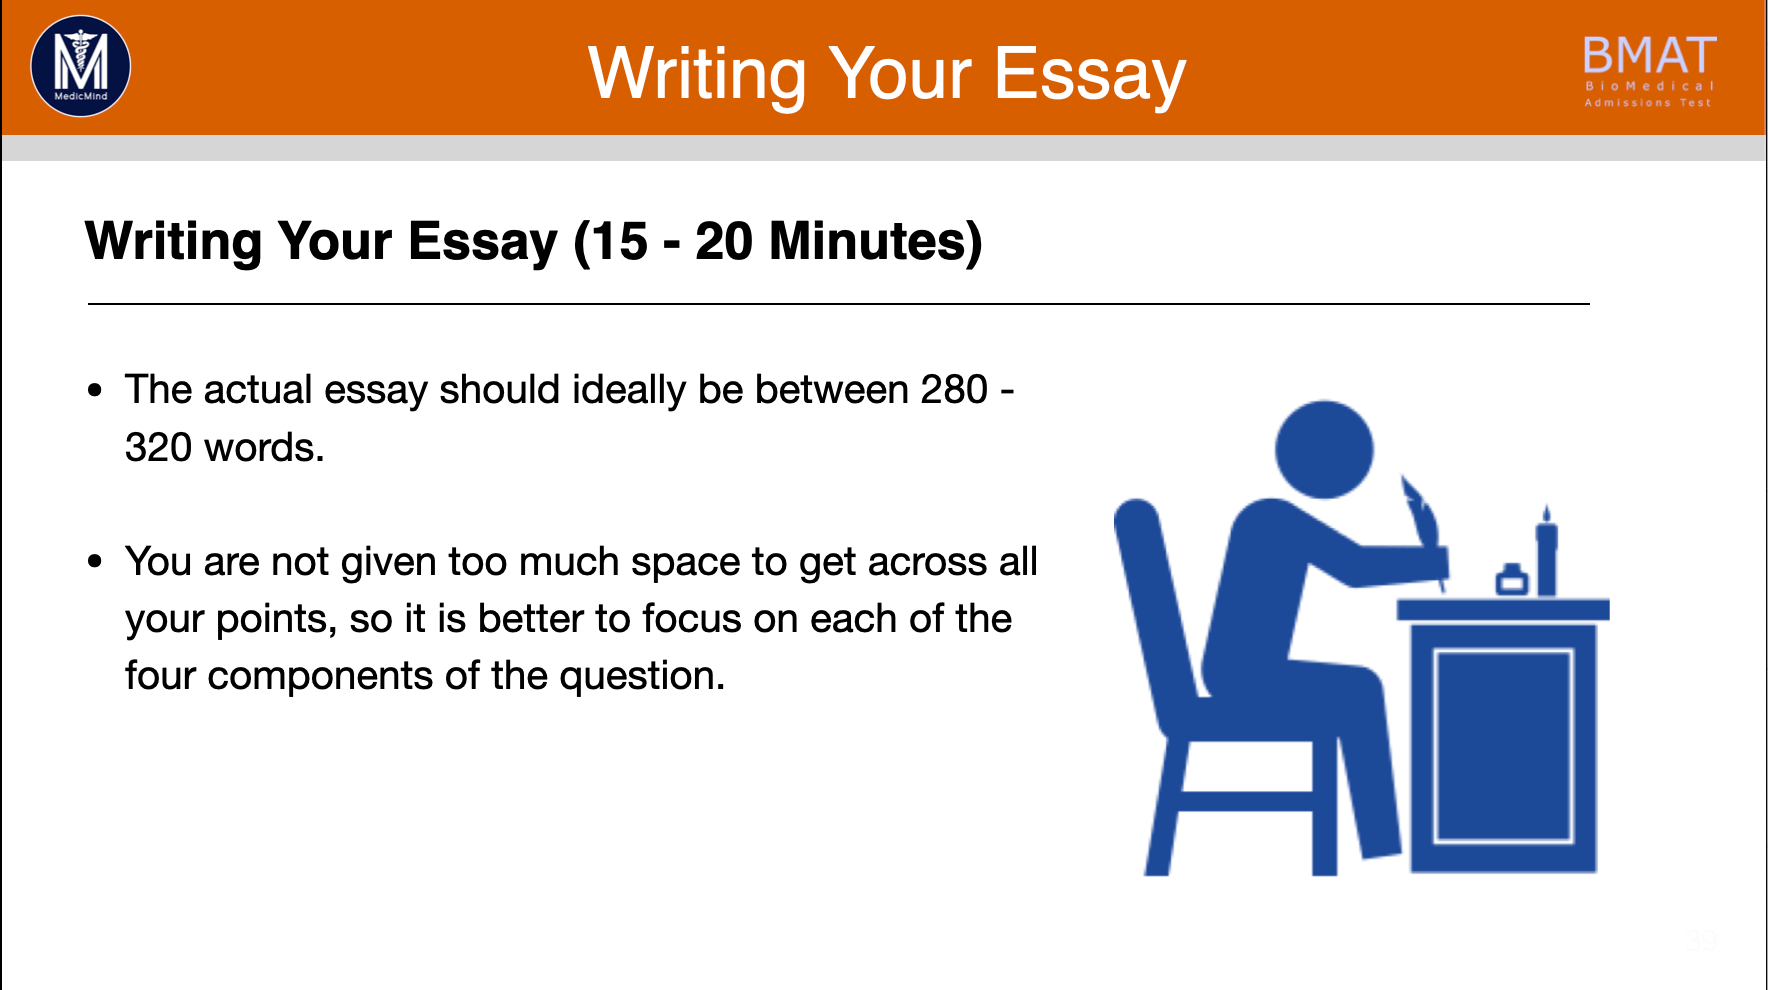 Writing Your Essay